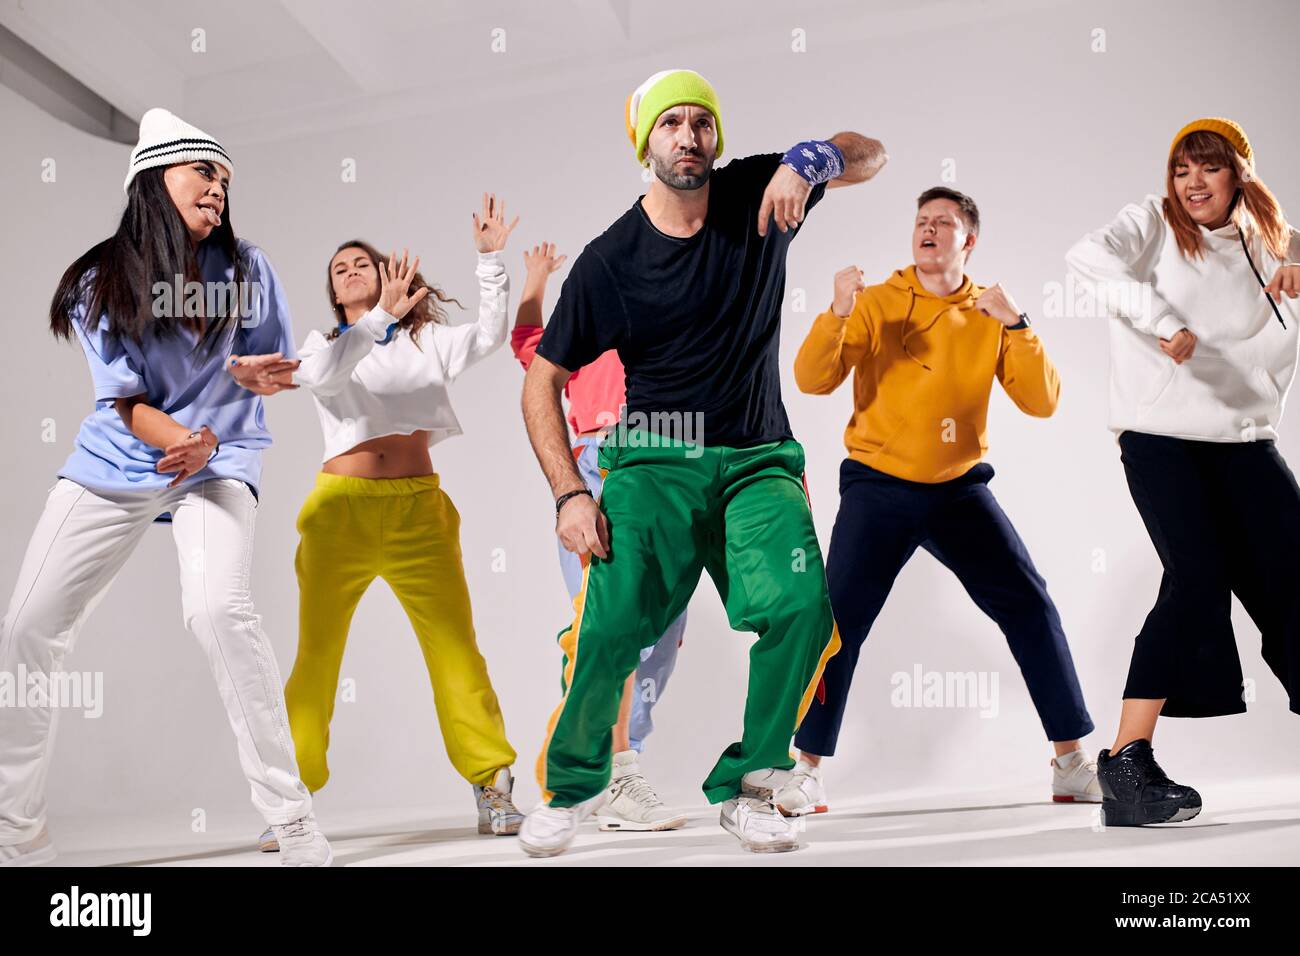 Delighted bright unshaven man wearing sportive outfit, having yellow cap  and banding bandana on wrist, performing hip hop dance together with  professi Stock Photo - Alamy